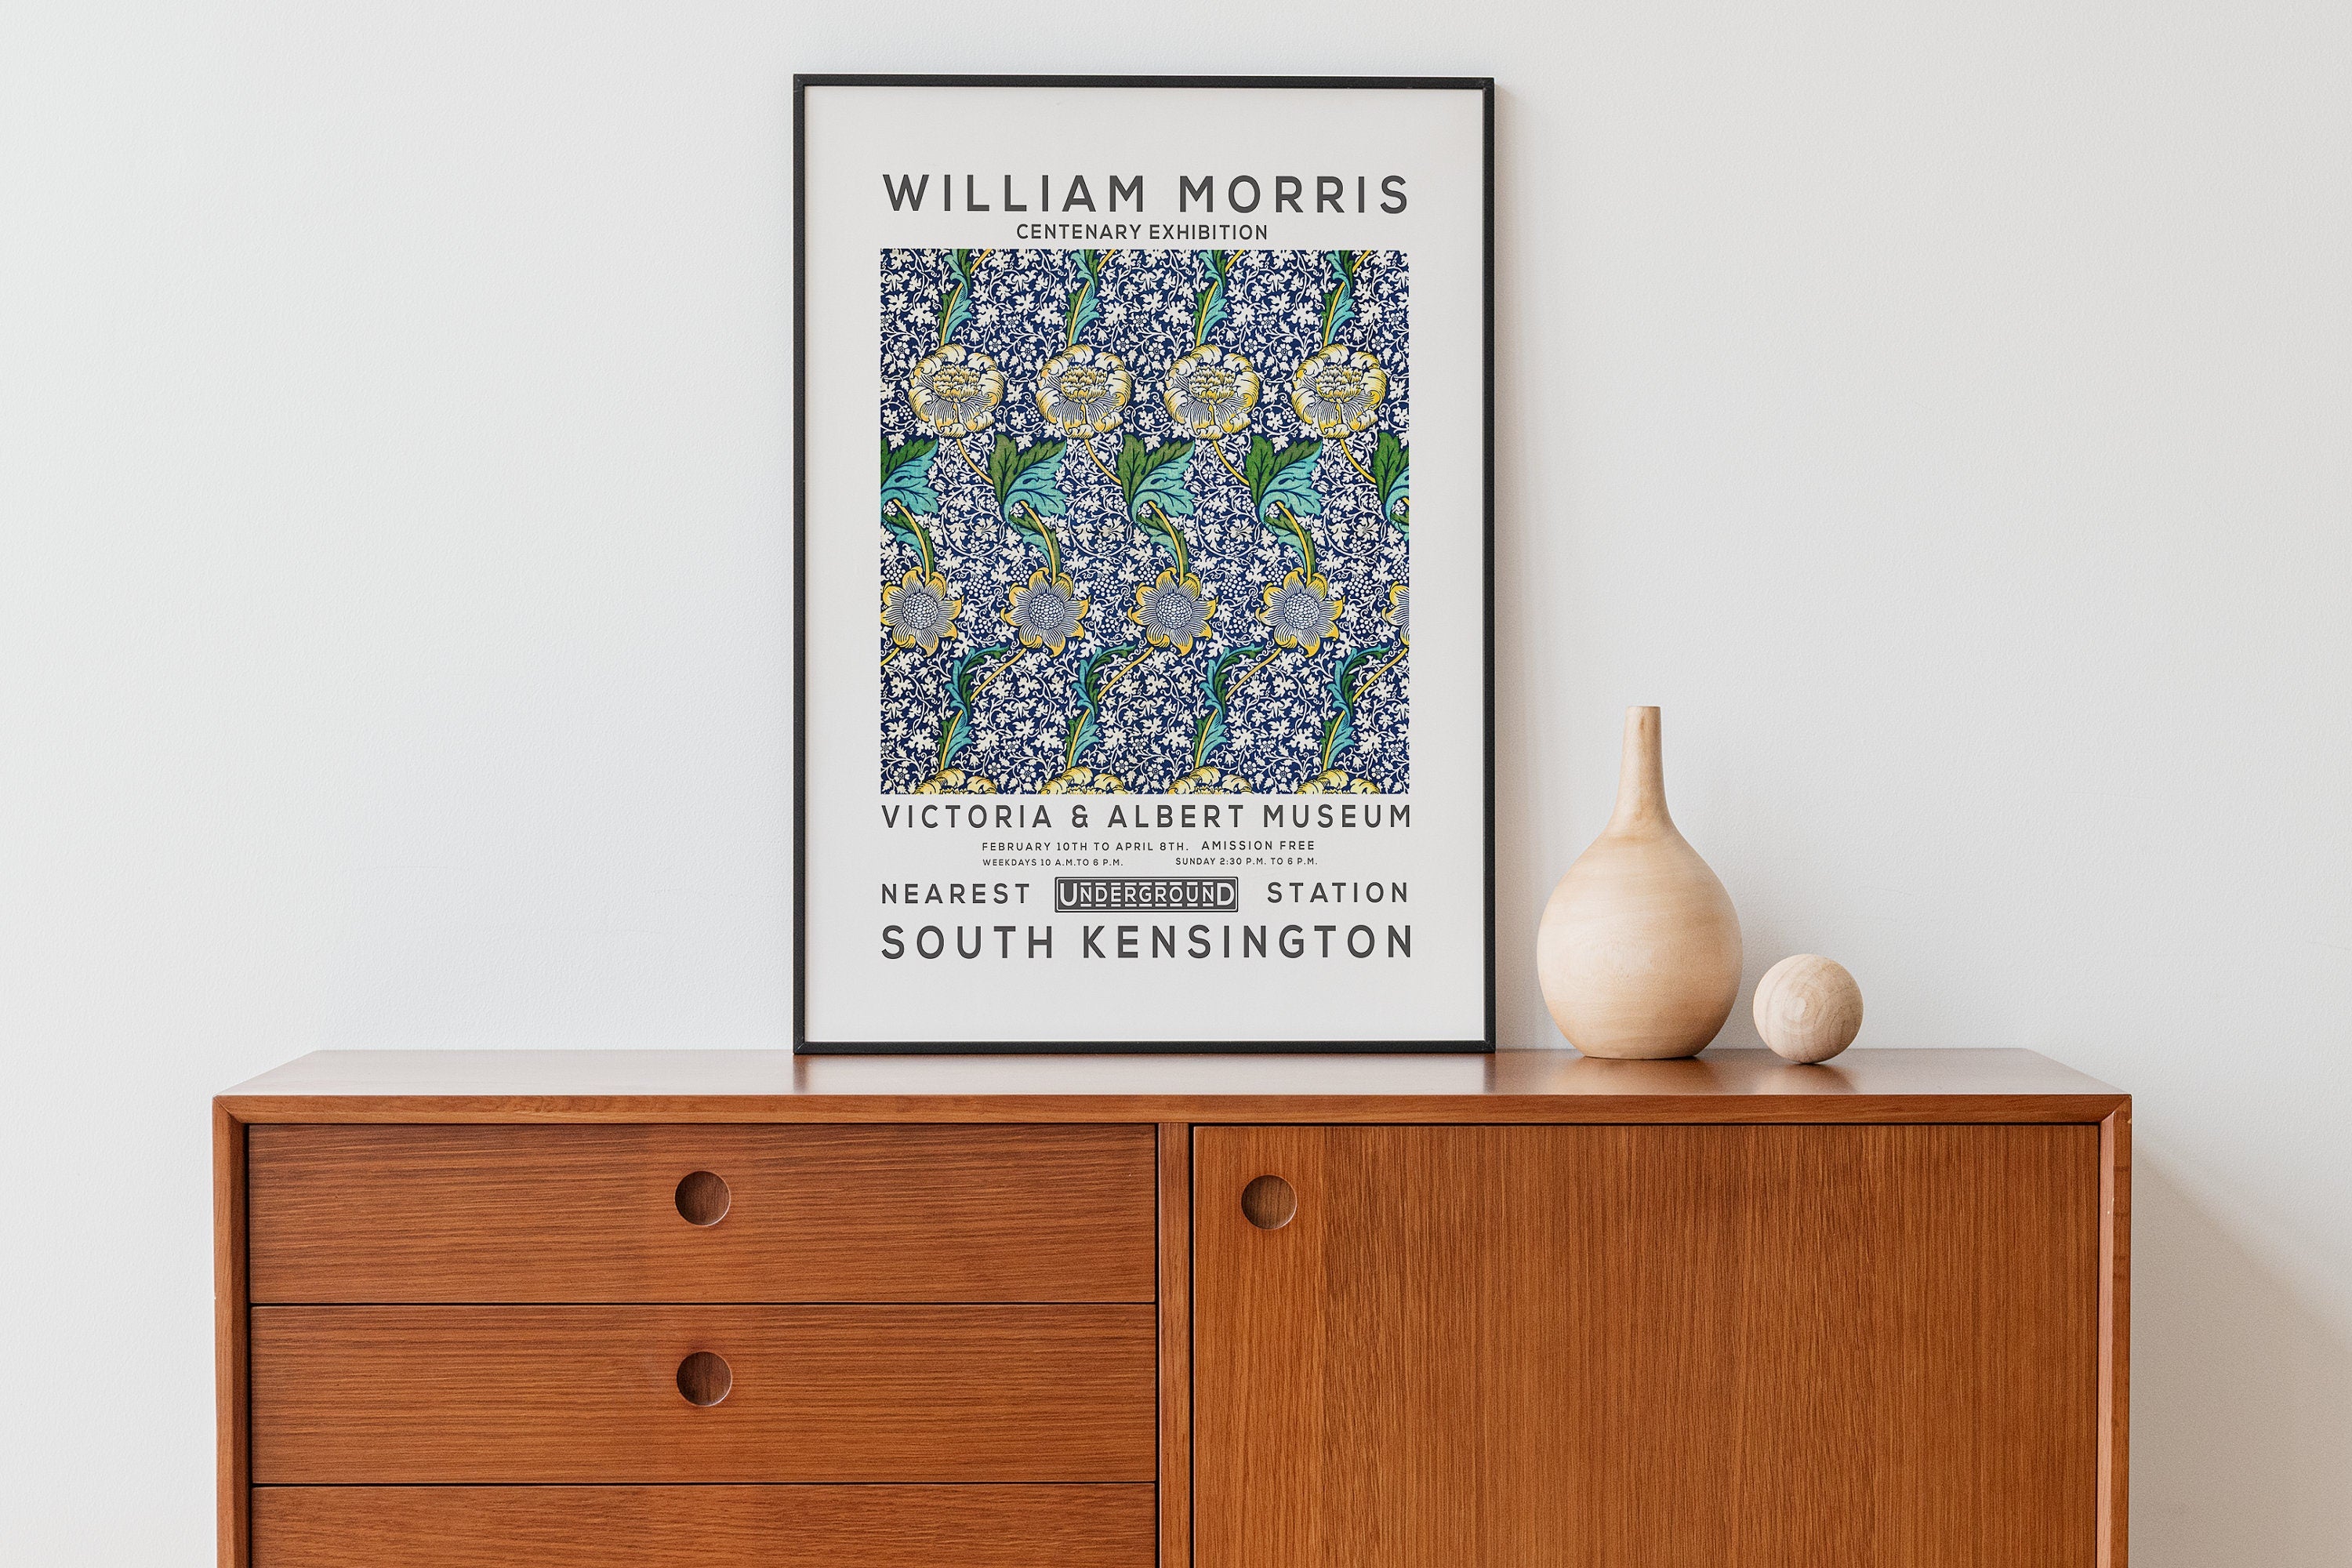 William Morris Print, Vintage Wall Decor, Exhibition Poster, Floral Wall Art, Flower Print, Home Decor, Kenneth